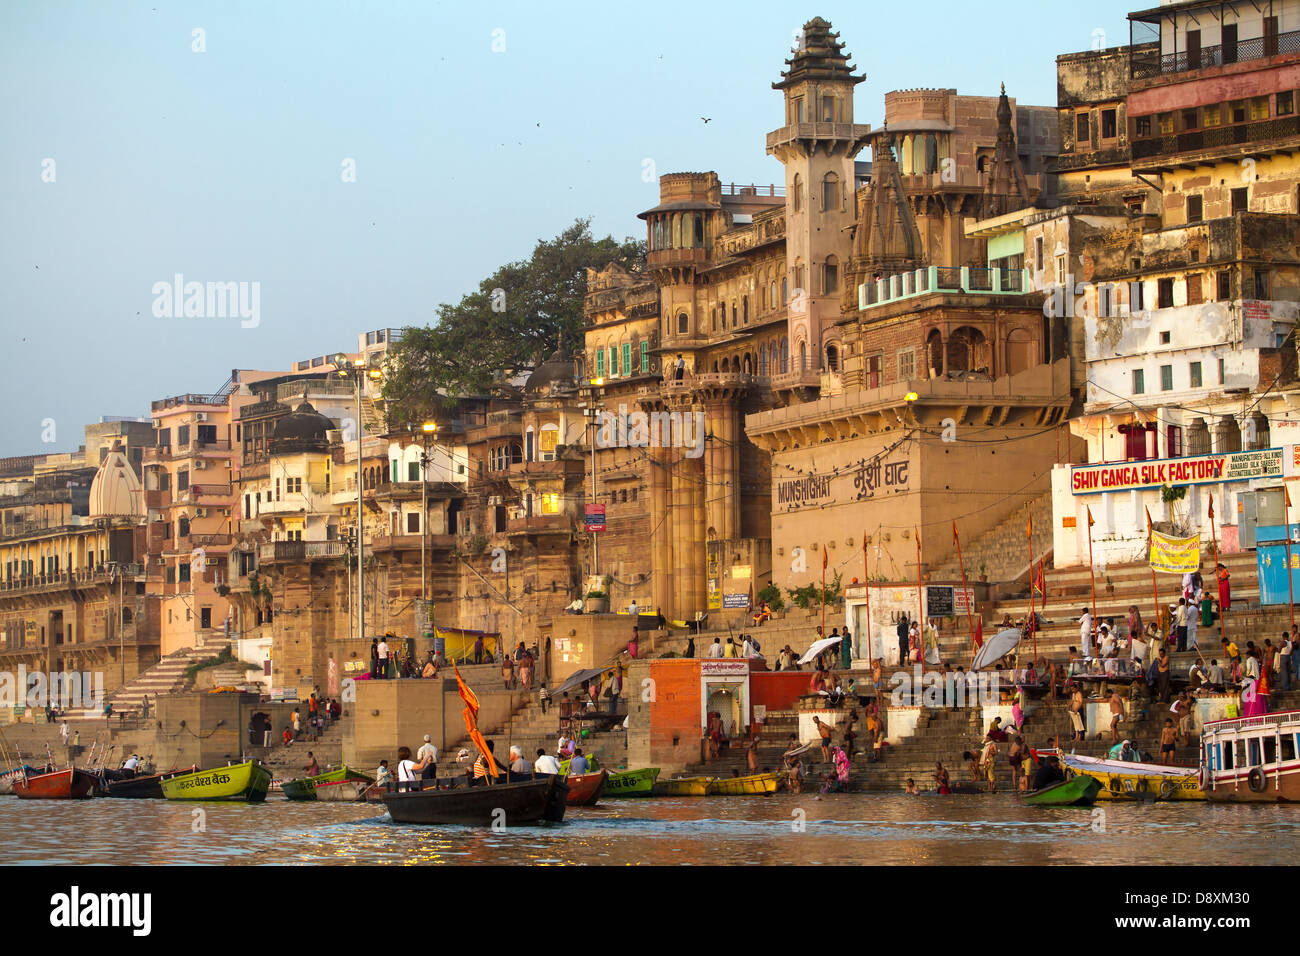 Ghats on the banks of Ganges river in holy city of Varanasi Stock Photo